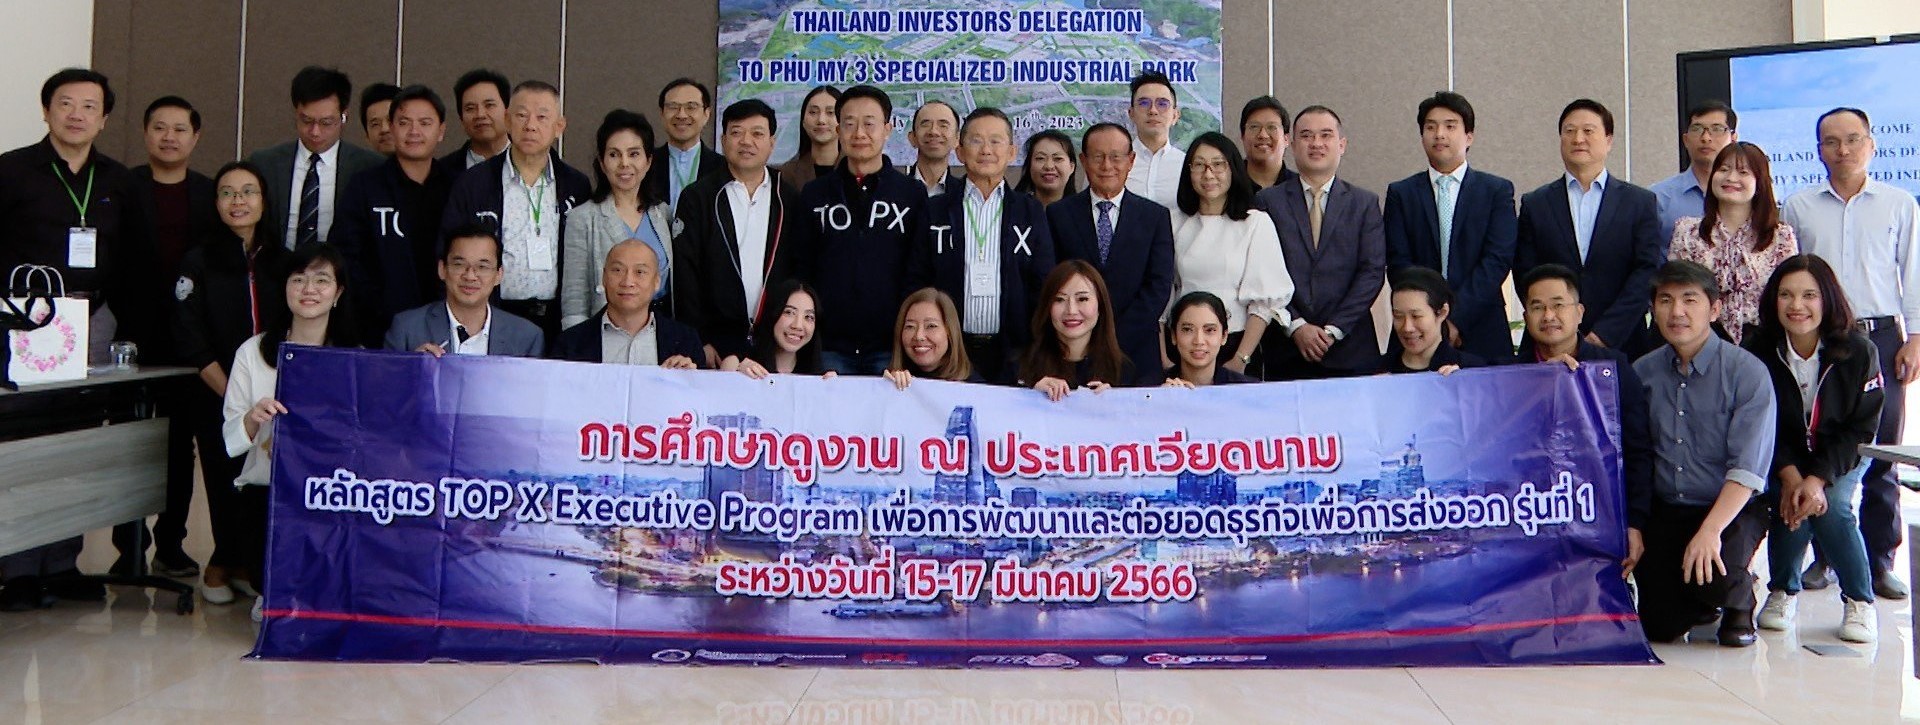 The Delegation Visit from Thailand